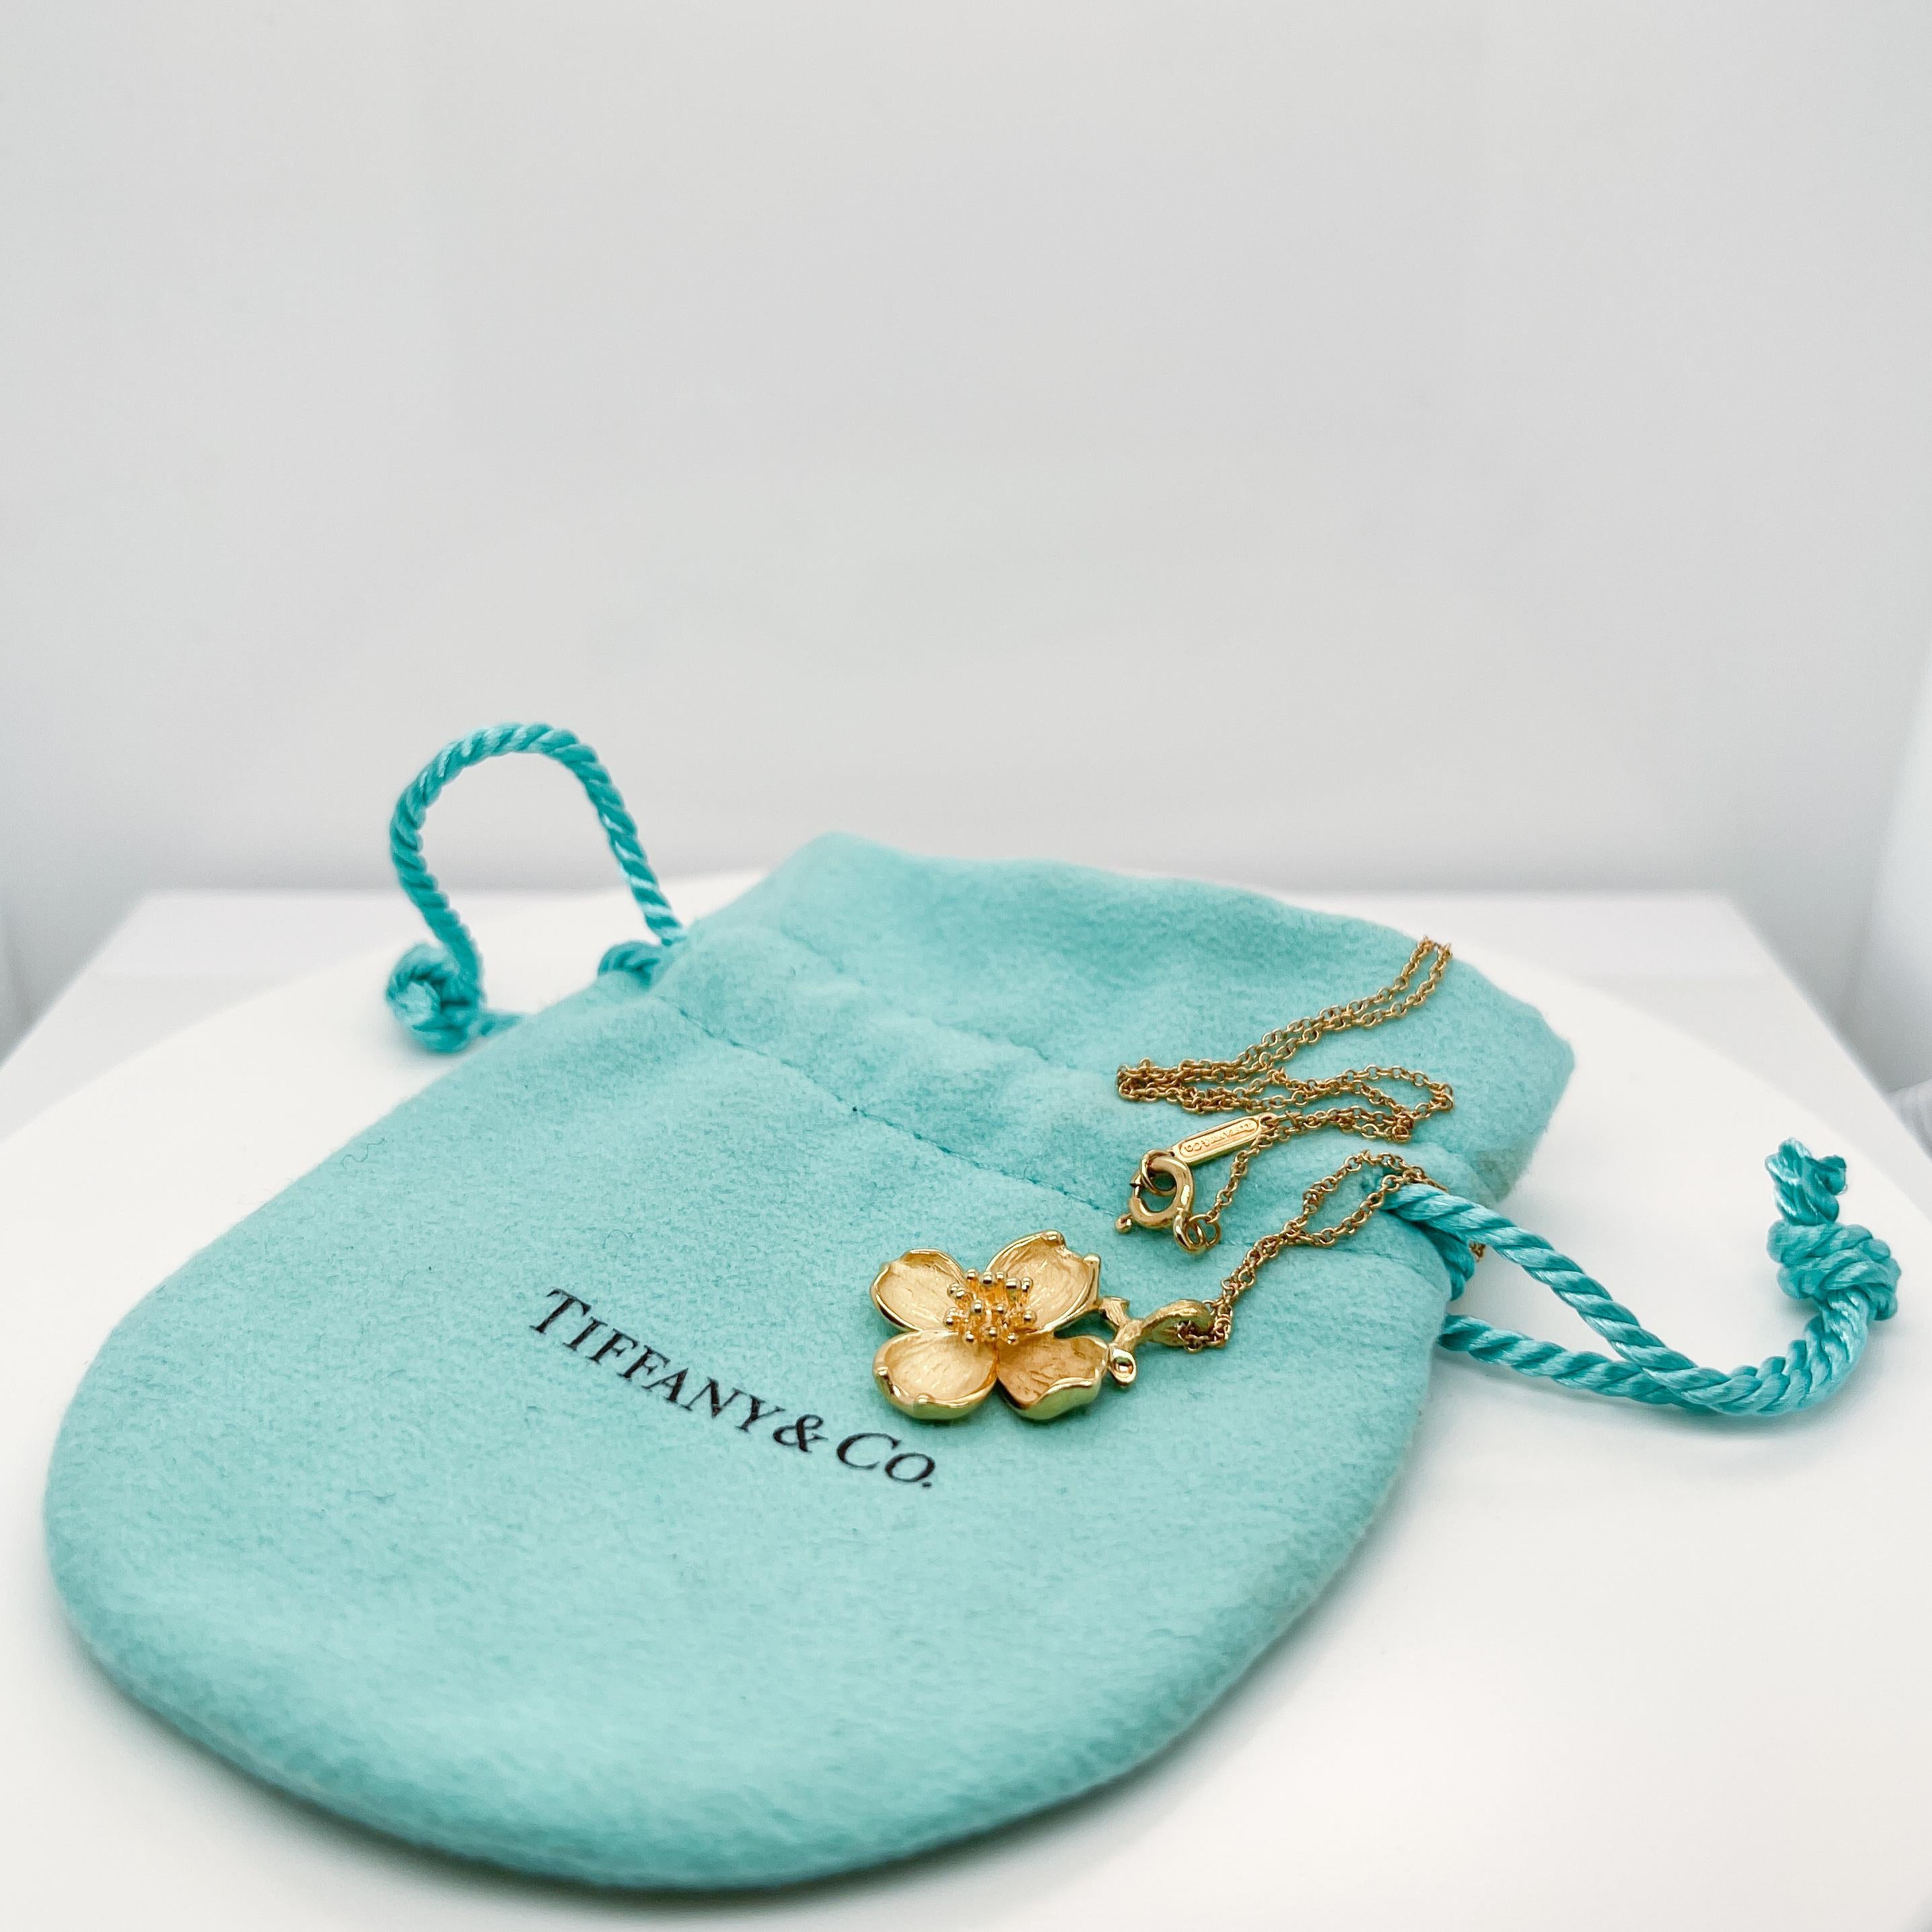 Vintage Tiffany & Co. 18K Gold Dogwood Flower Pendant Necklace with Gold Chain 2